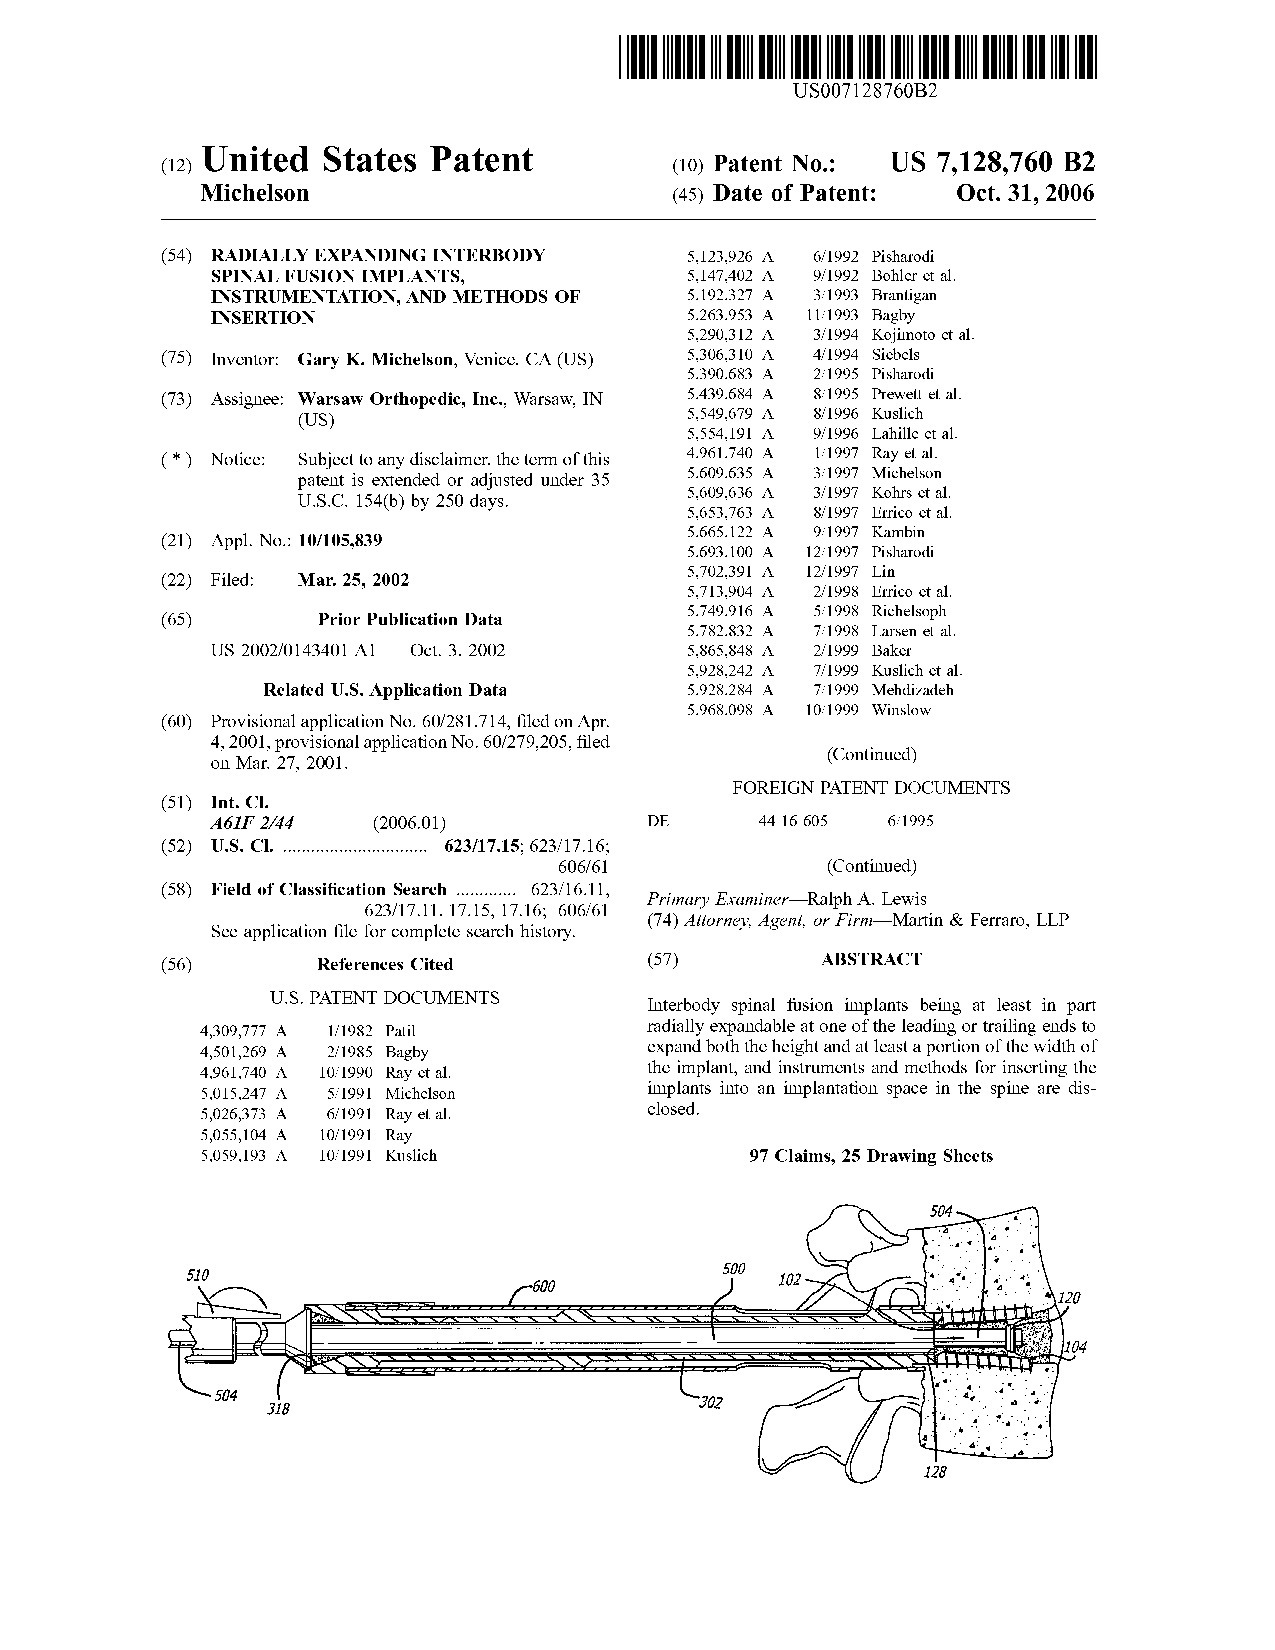 Radially expanding interbody spinal fusion implants, instrumentation, and     methods of insertion - Patent 7,128,760